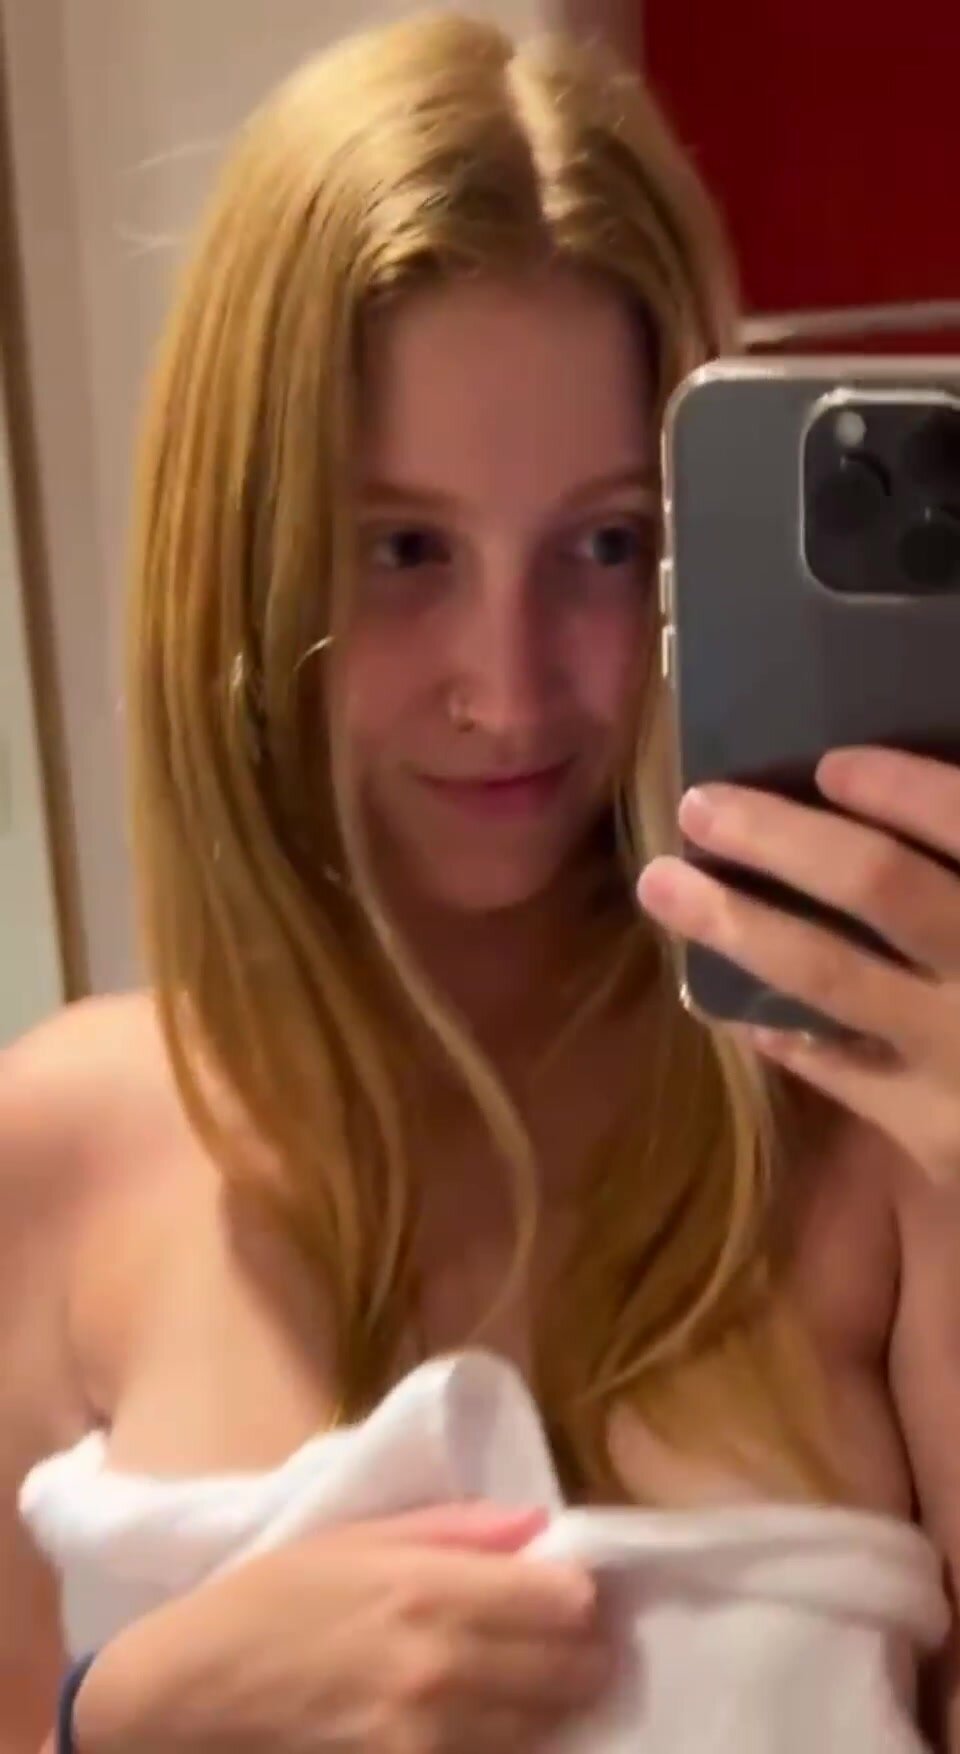 Cutie ginger showing cute titties to make you really hard